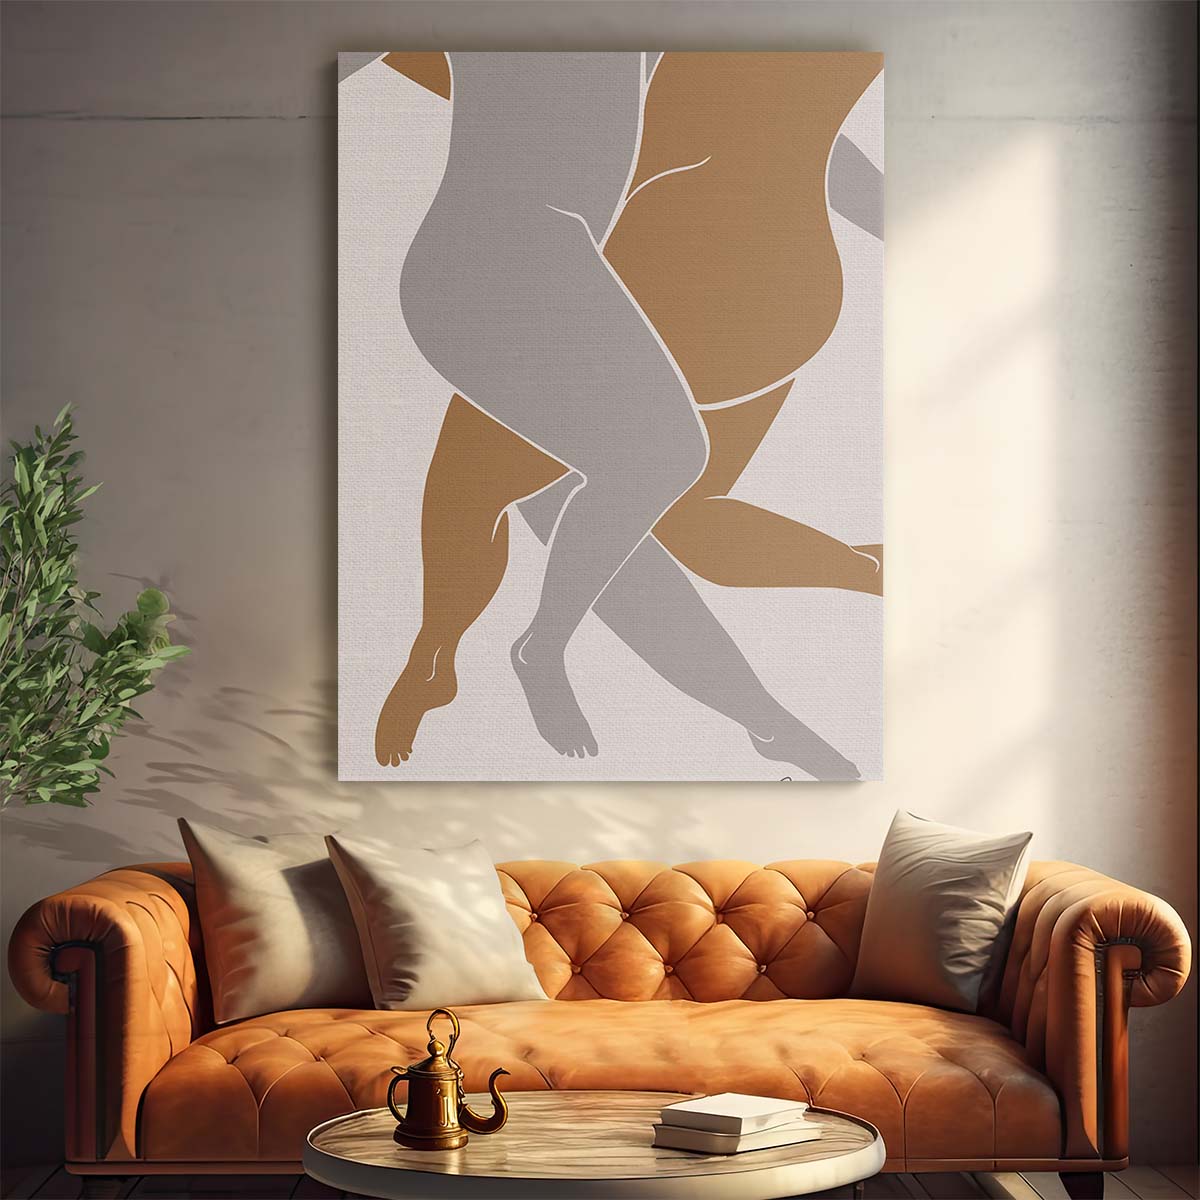 Mid-Century Matisse-Inspired Figurative Illustration of Cuddling Lovers by Luxuriance Designs, made in USA